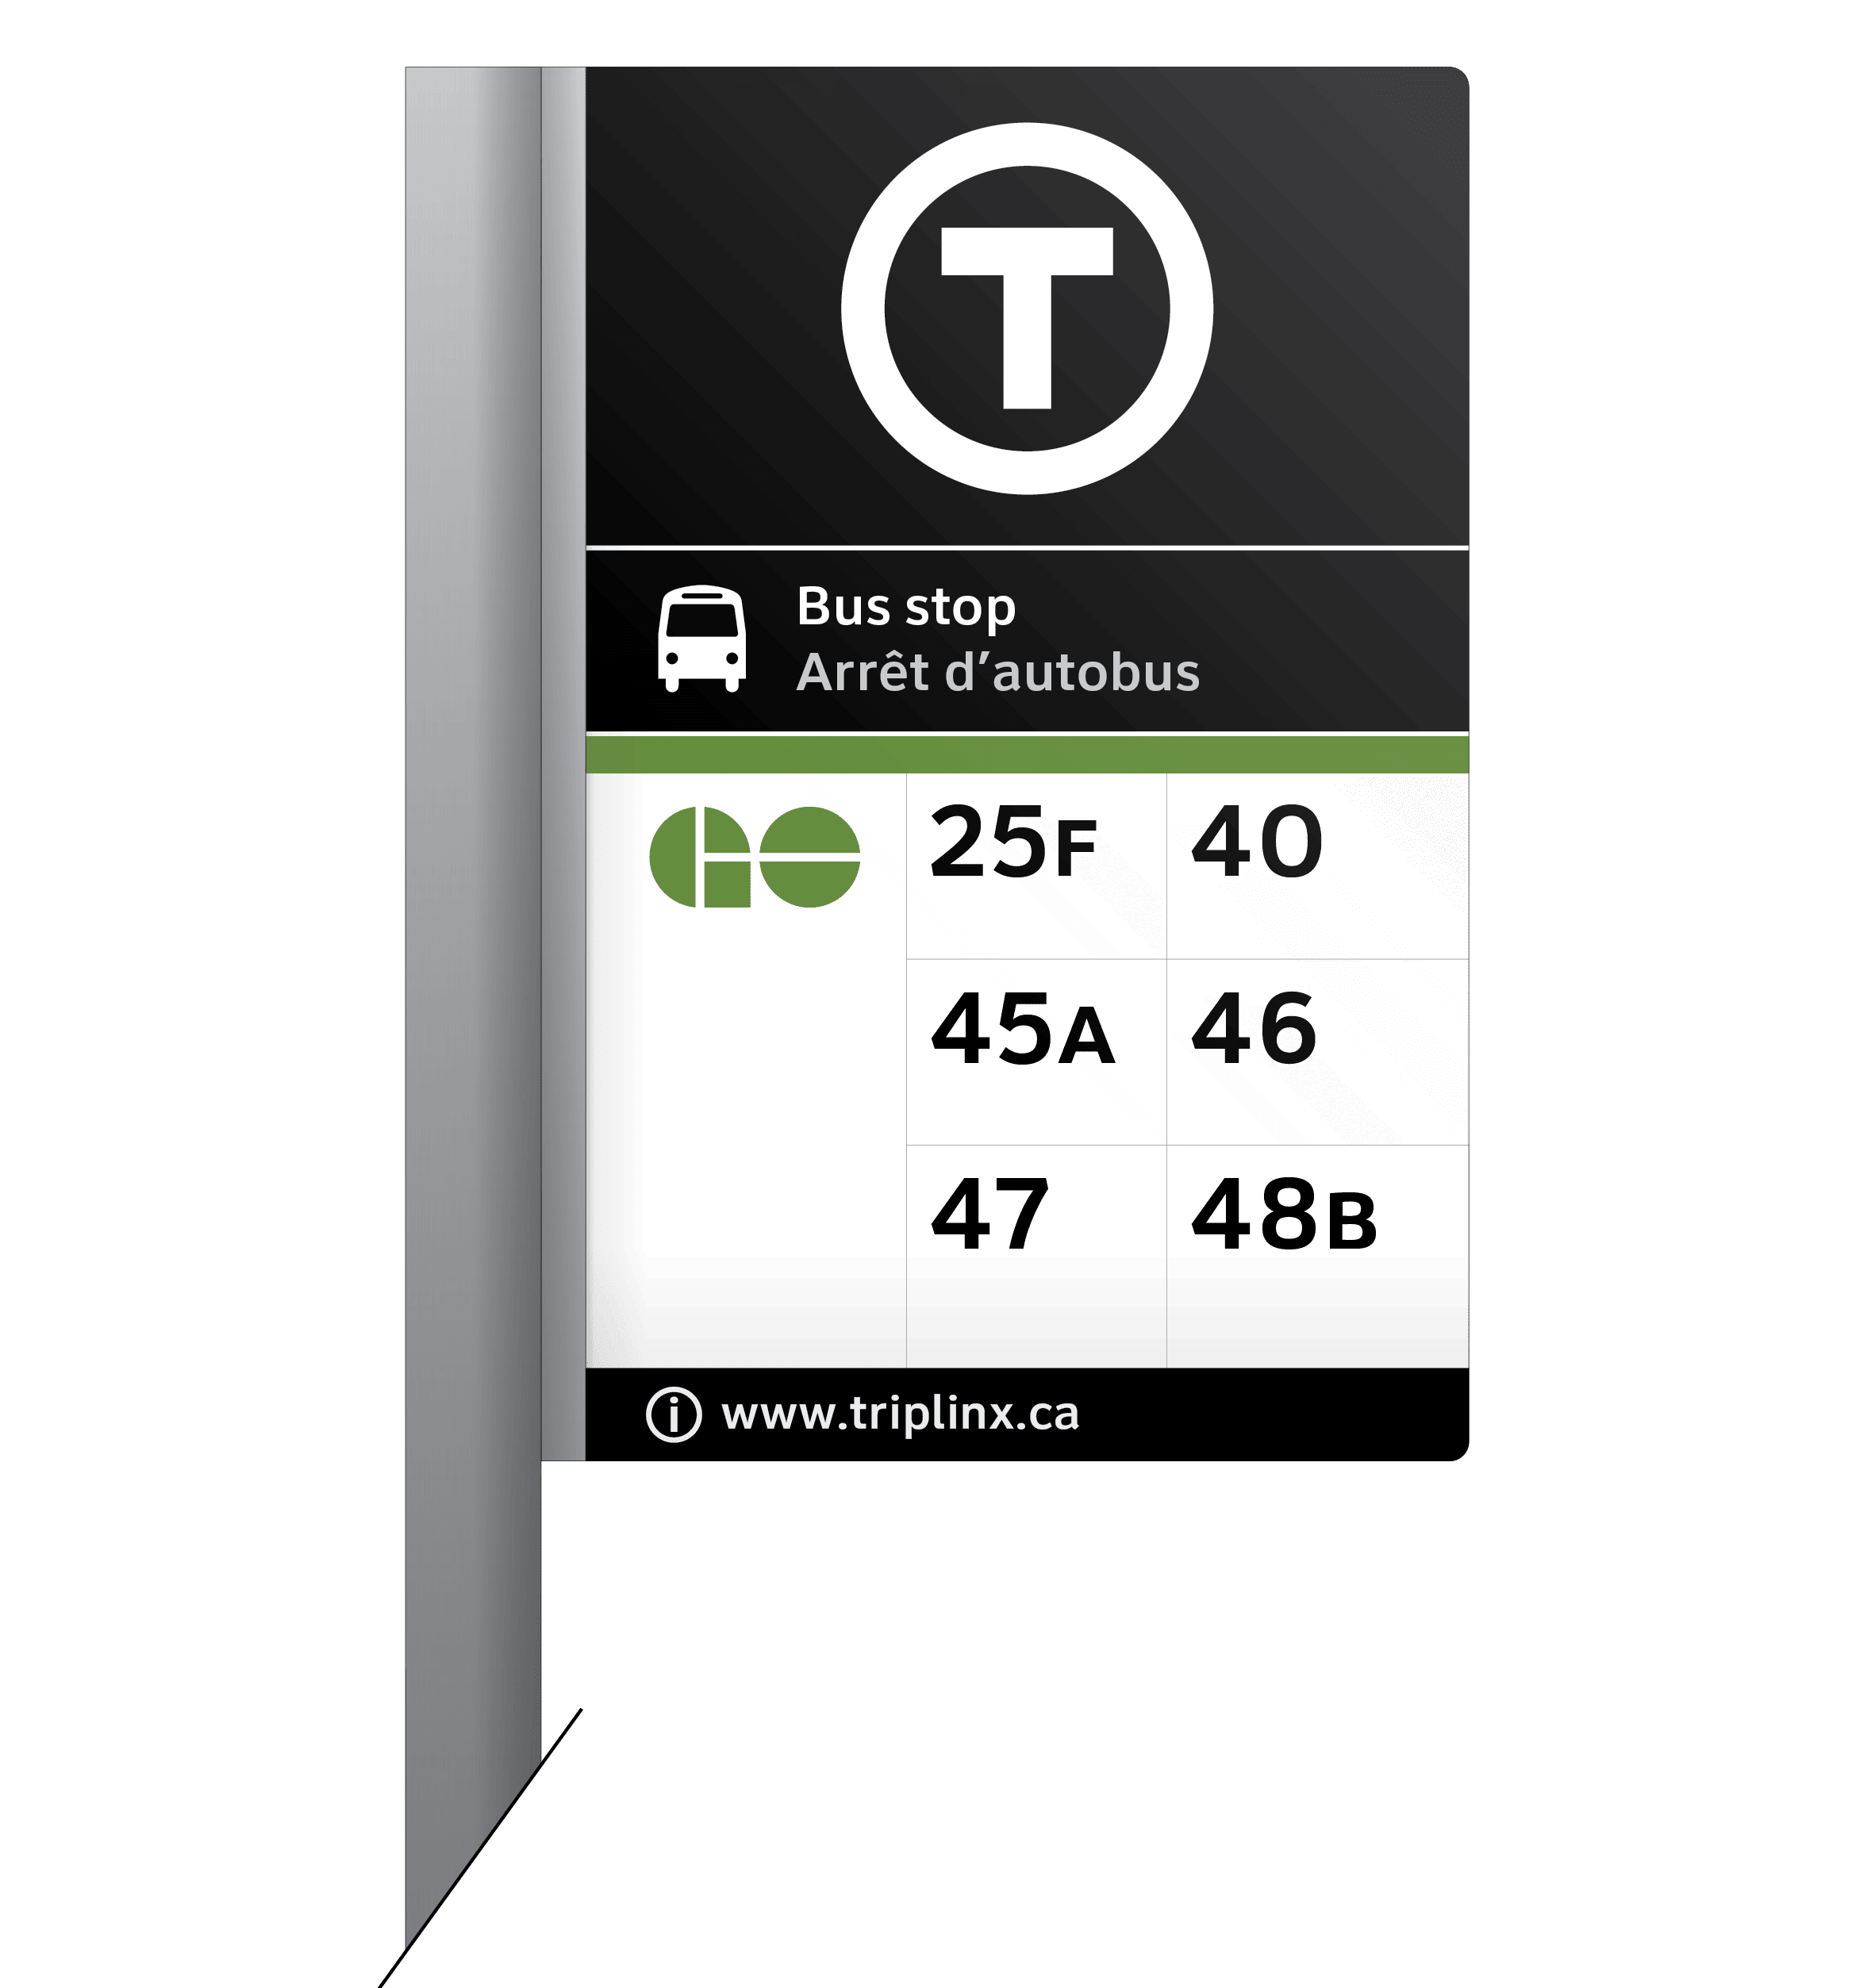 An example of a GO bus stop with the new "T" transit symbol